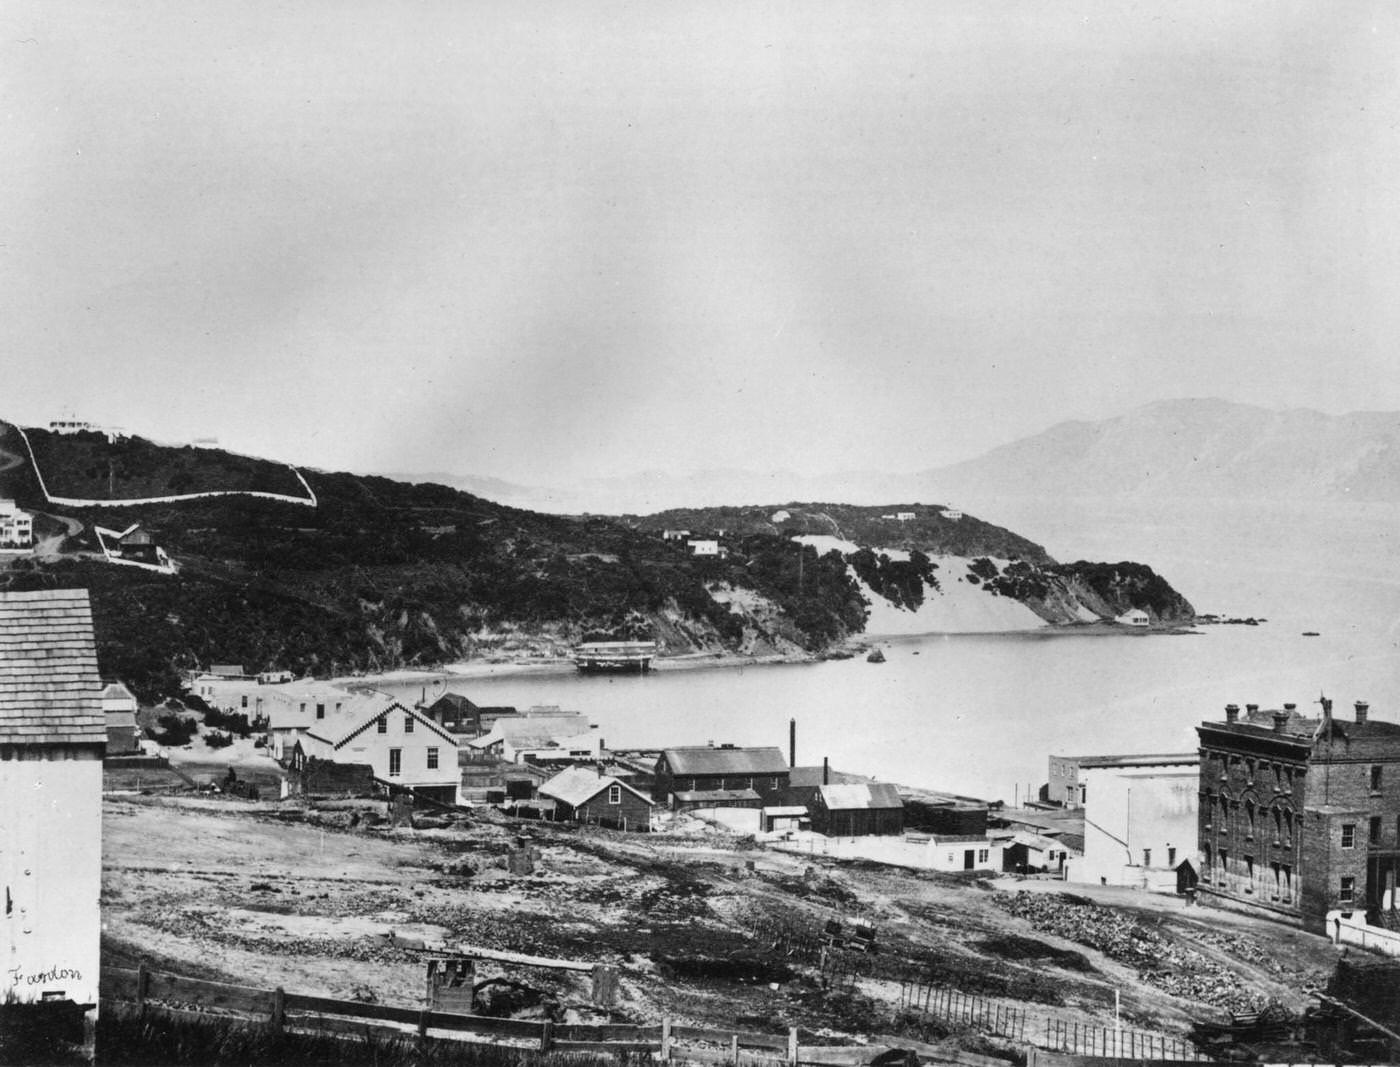 A view of North Beach and the San Francisco Bay from Telegraph Hill, San Francisco, 1855